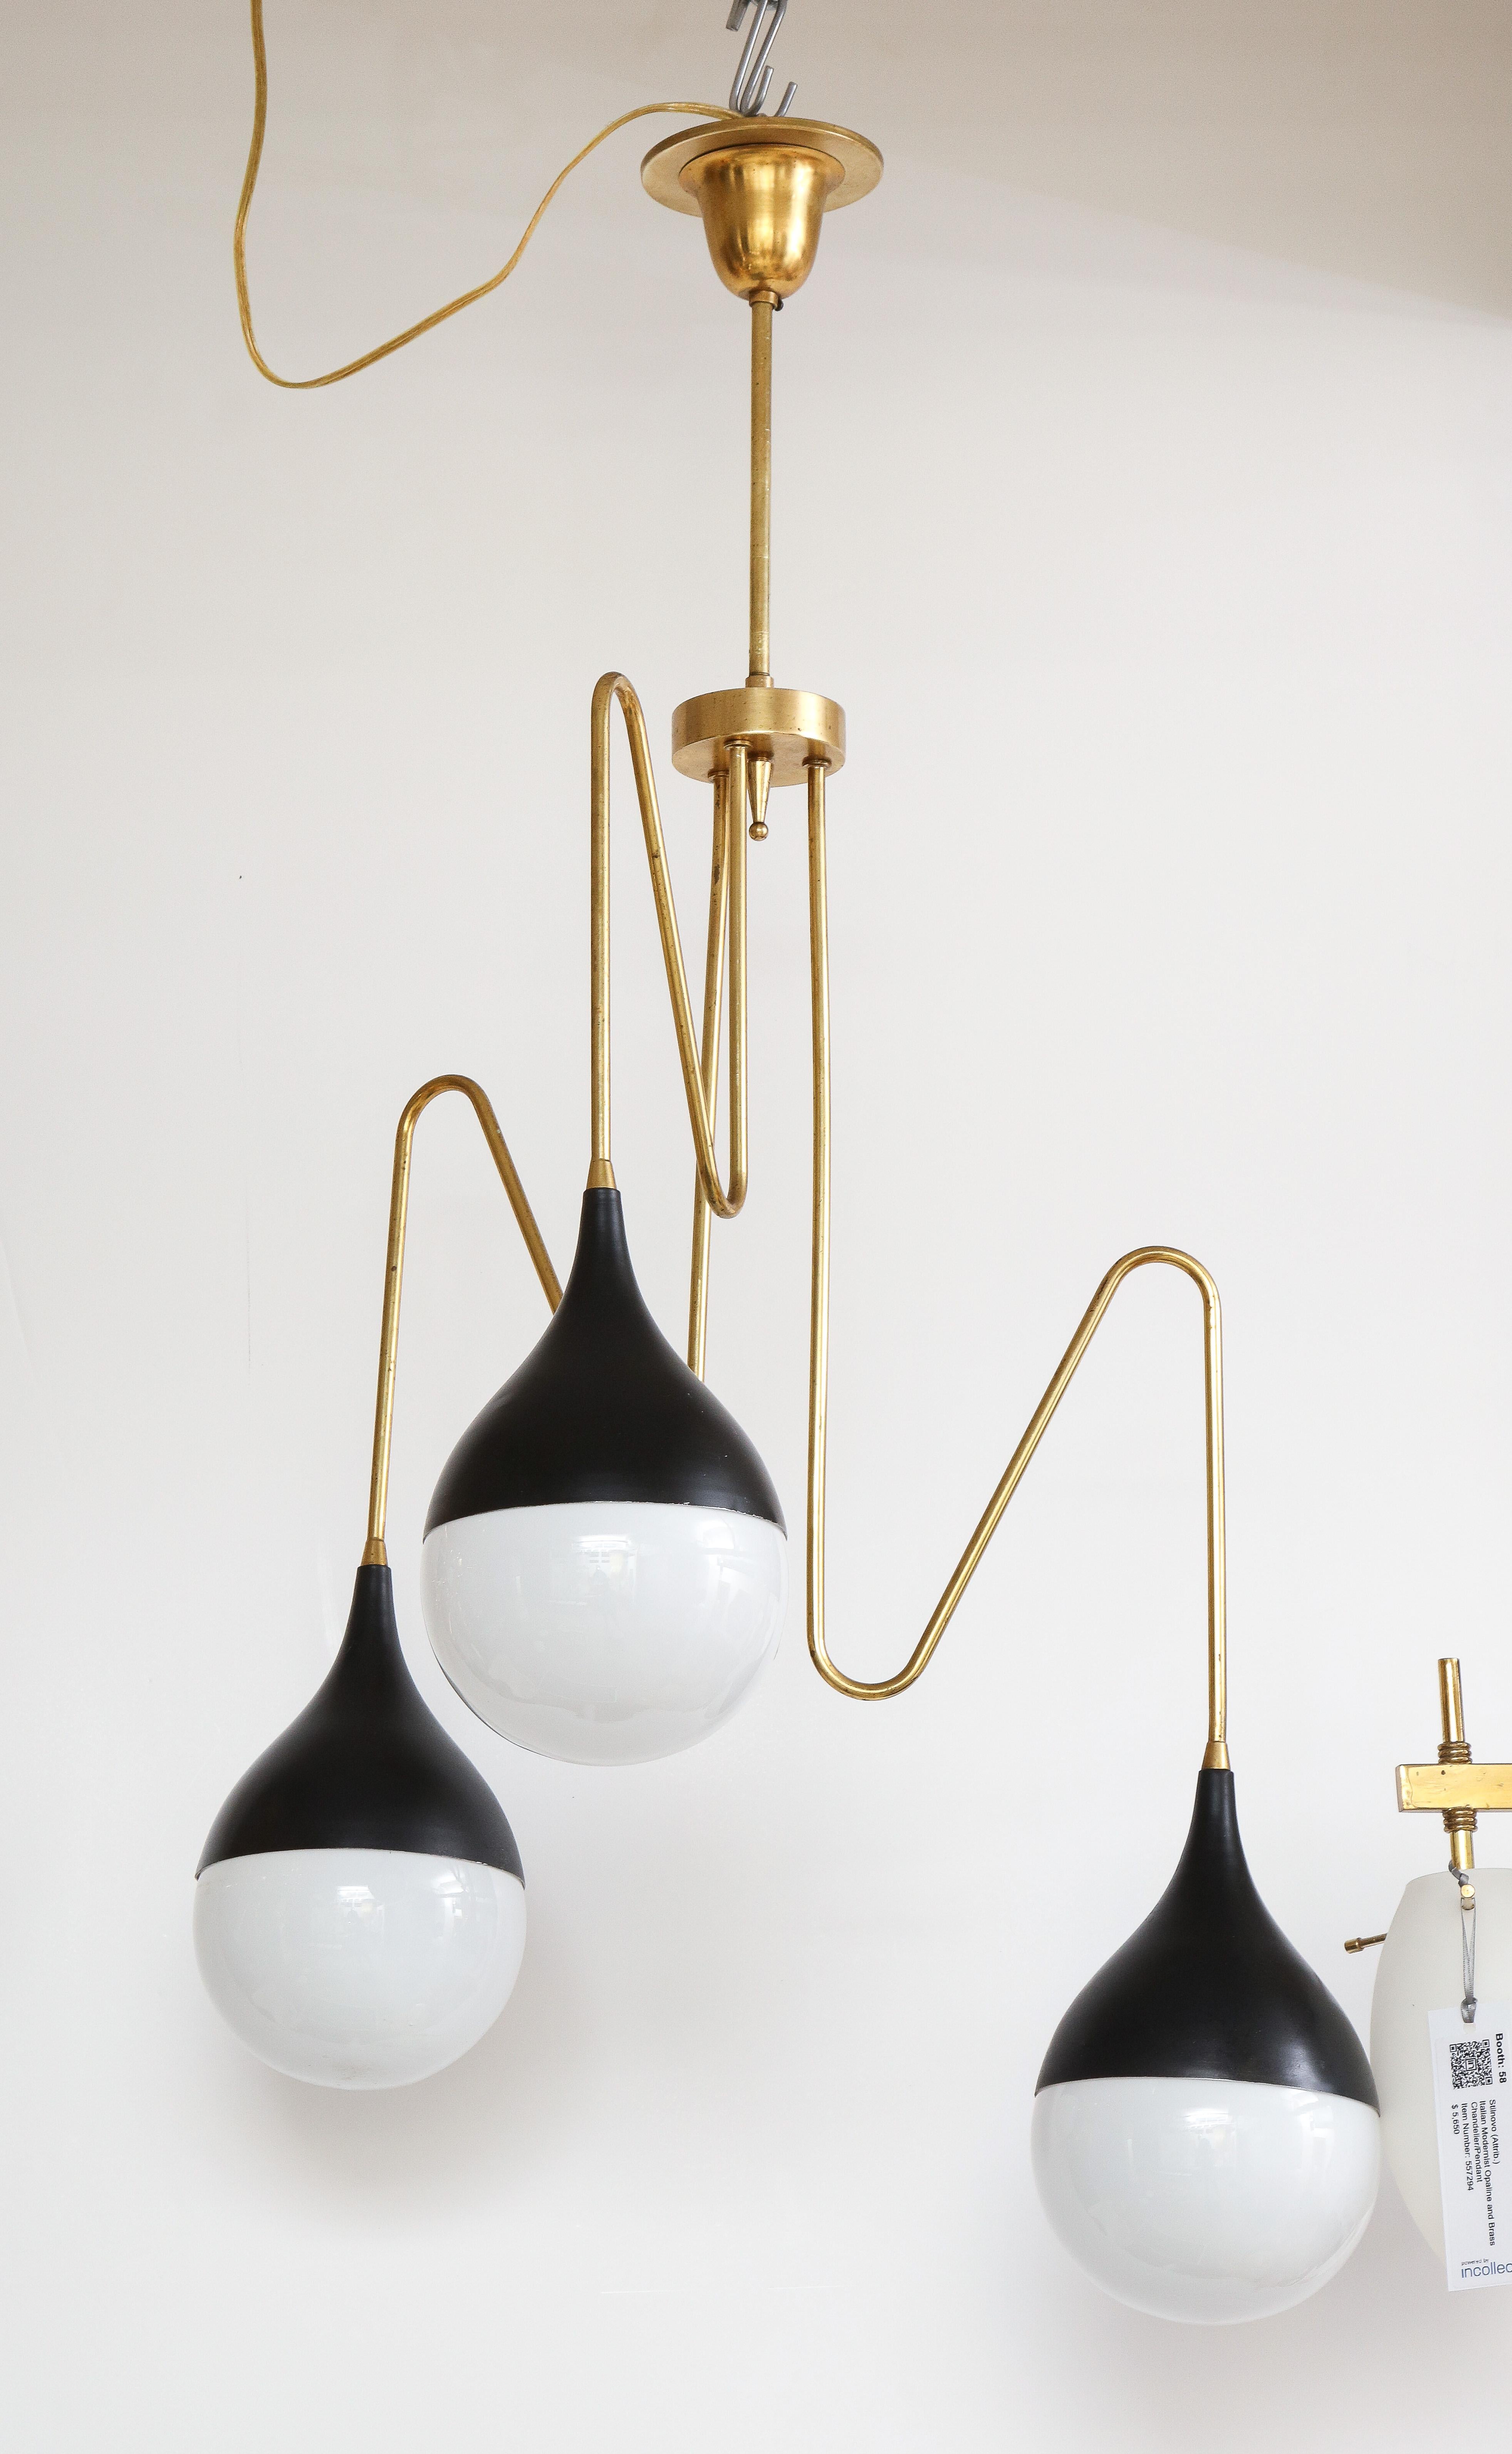 Italian 1950's Brass and Glass Three Light Chandelier For Sale 1